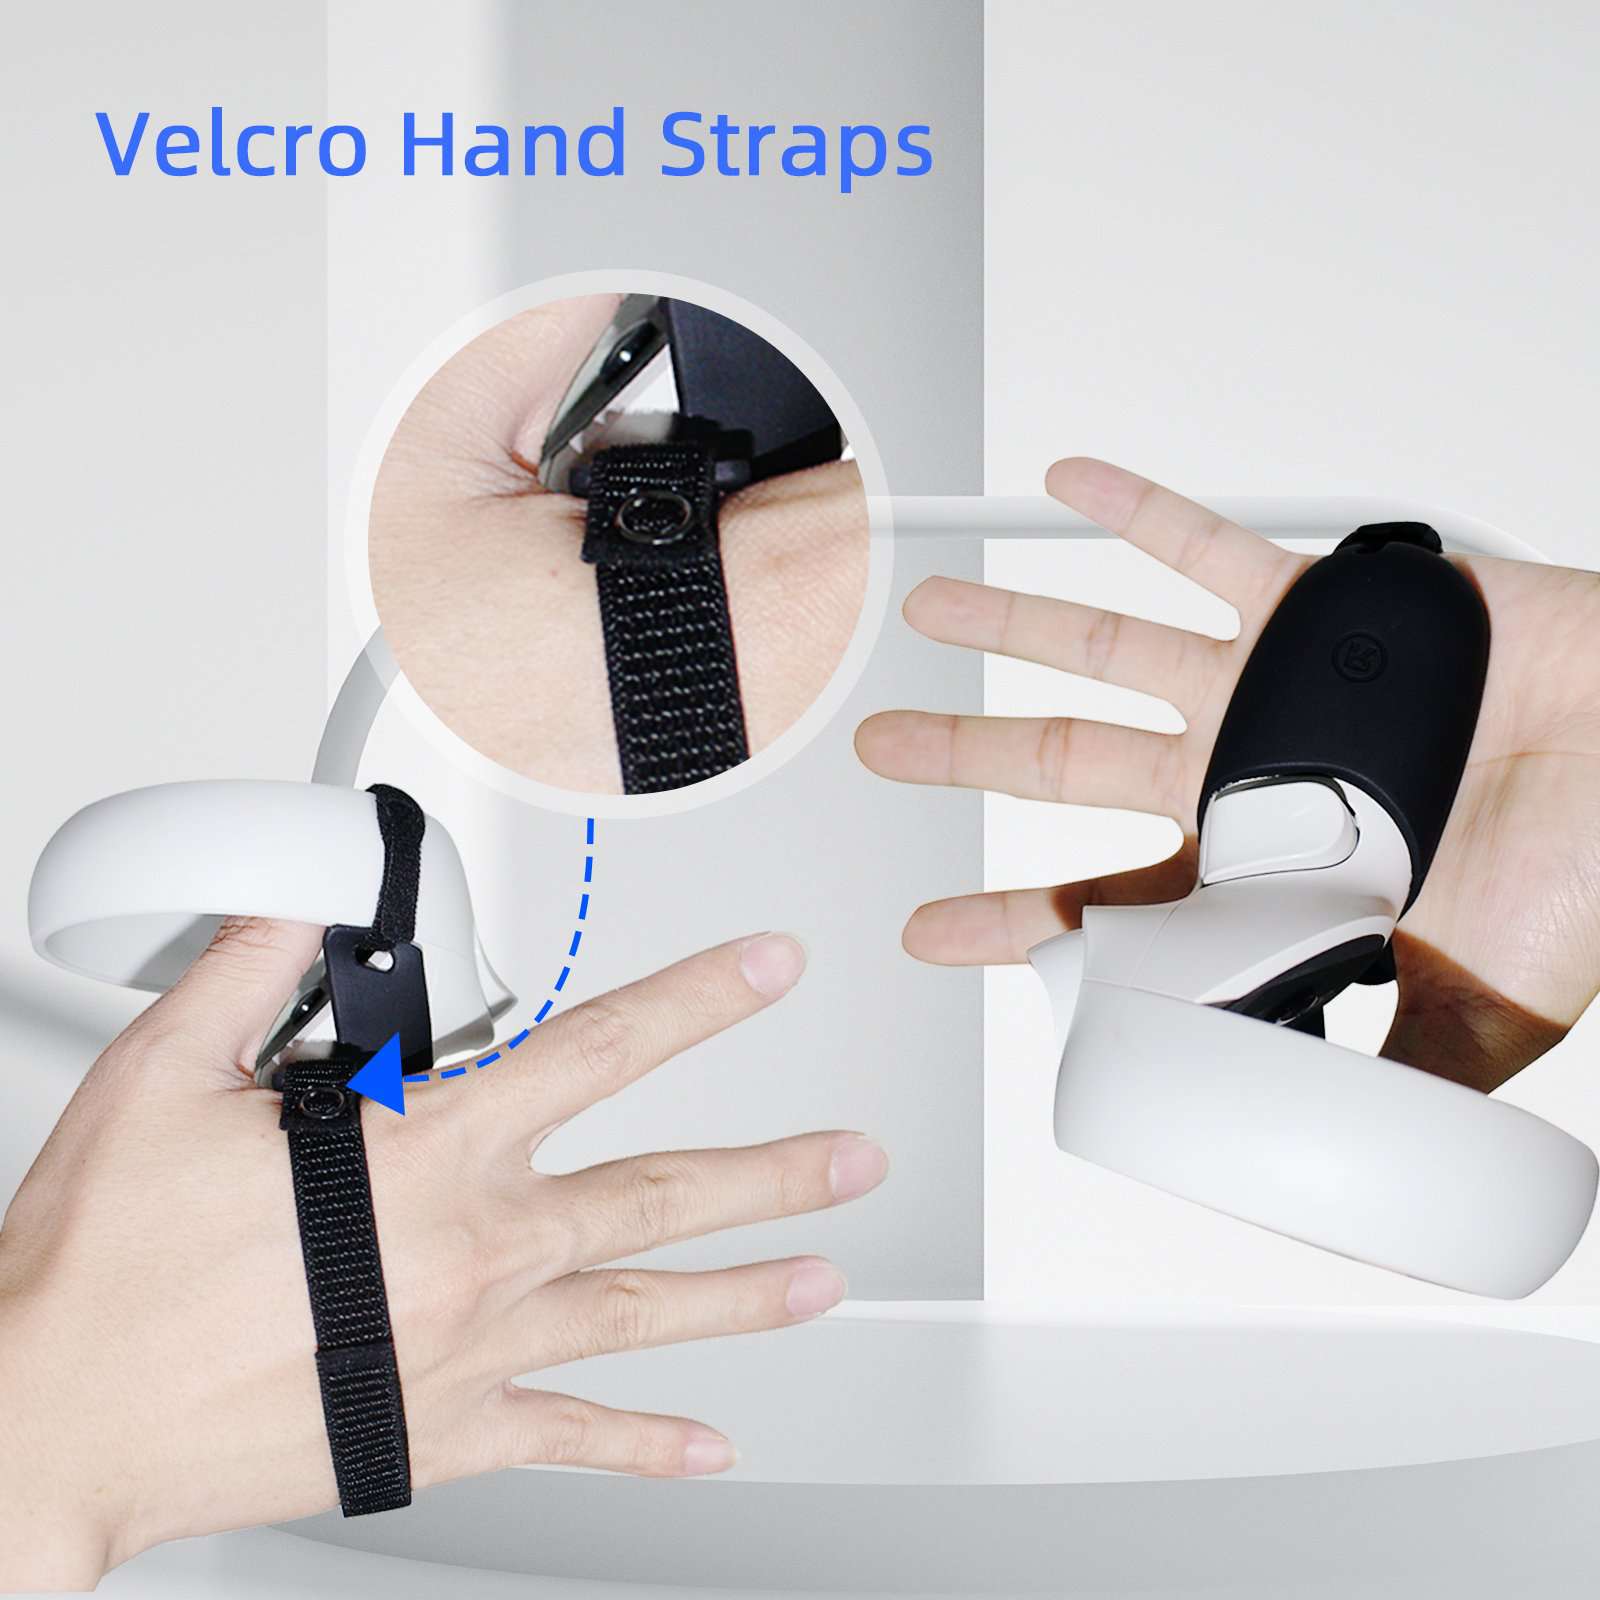 Securely fix the VR controller with the silicone cover's buckle to prevent it from falling off.